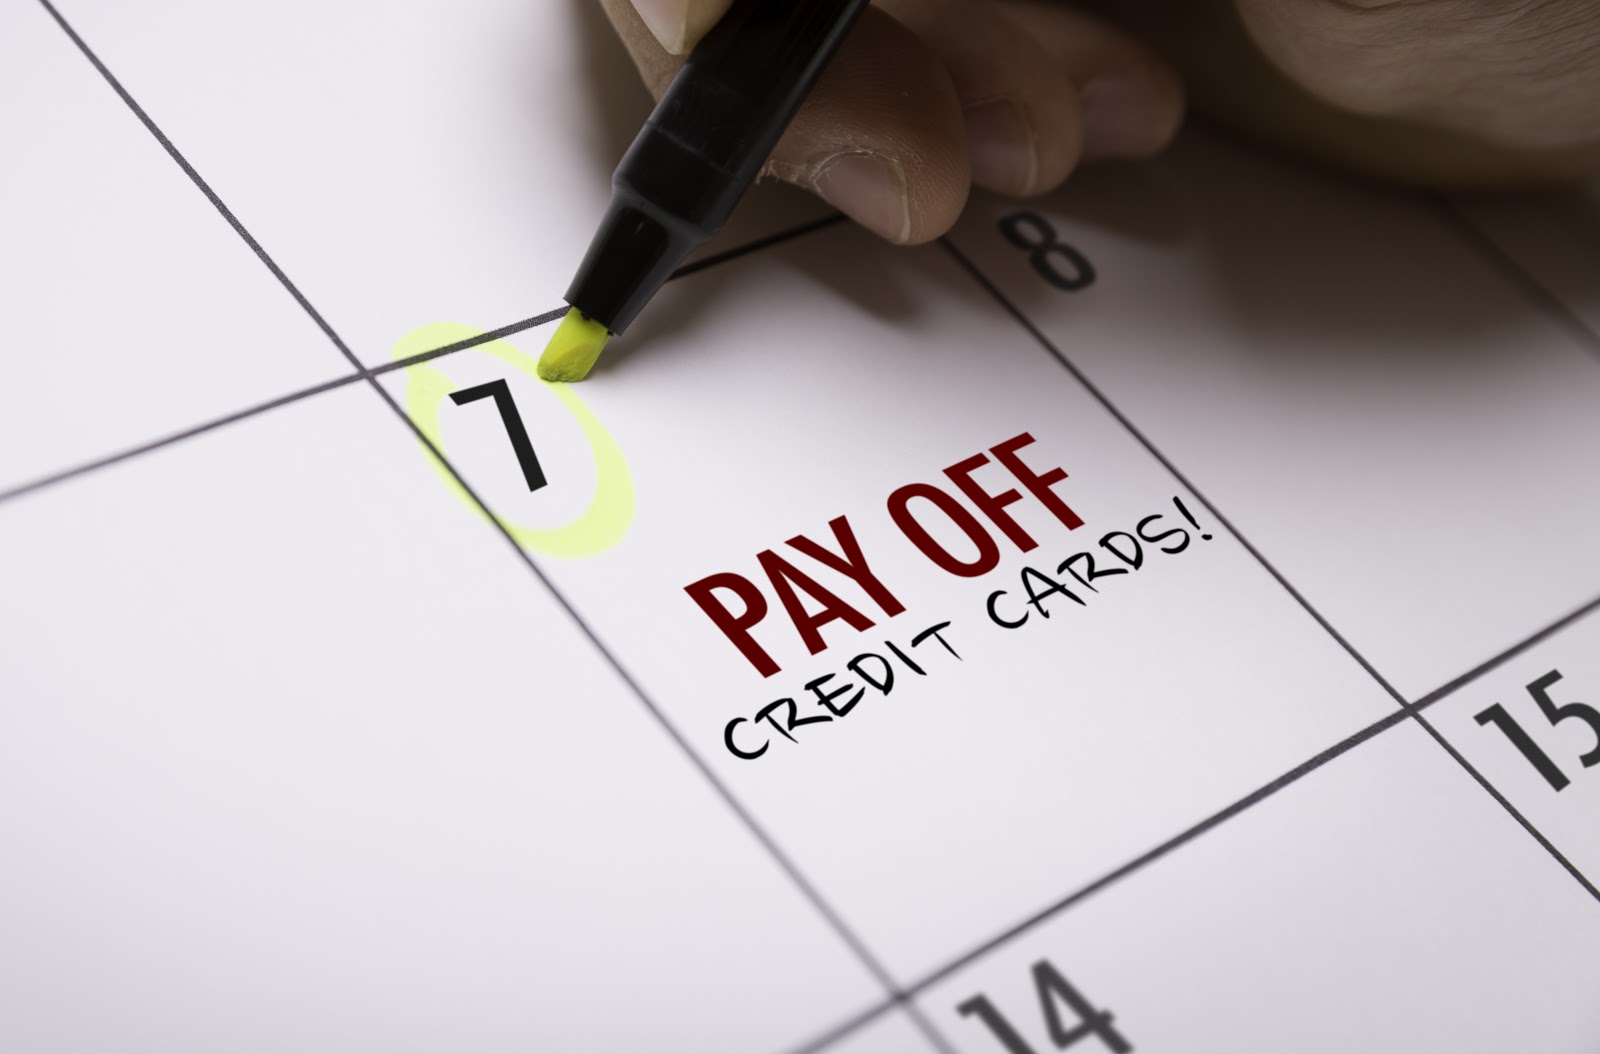 Best way to pay off multiple credit cards: Calendar reminder